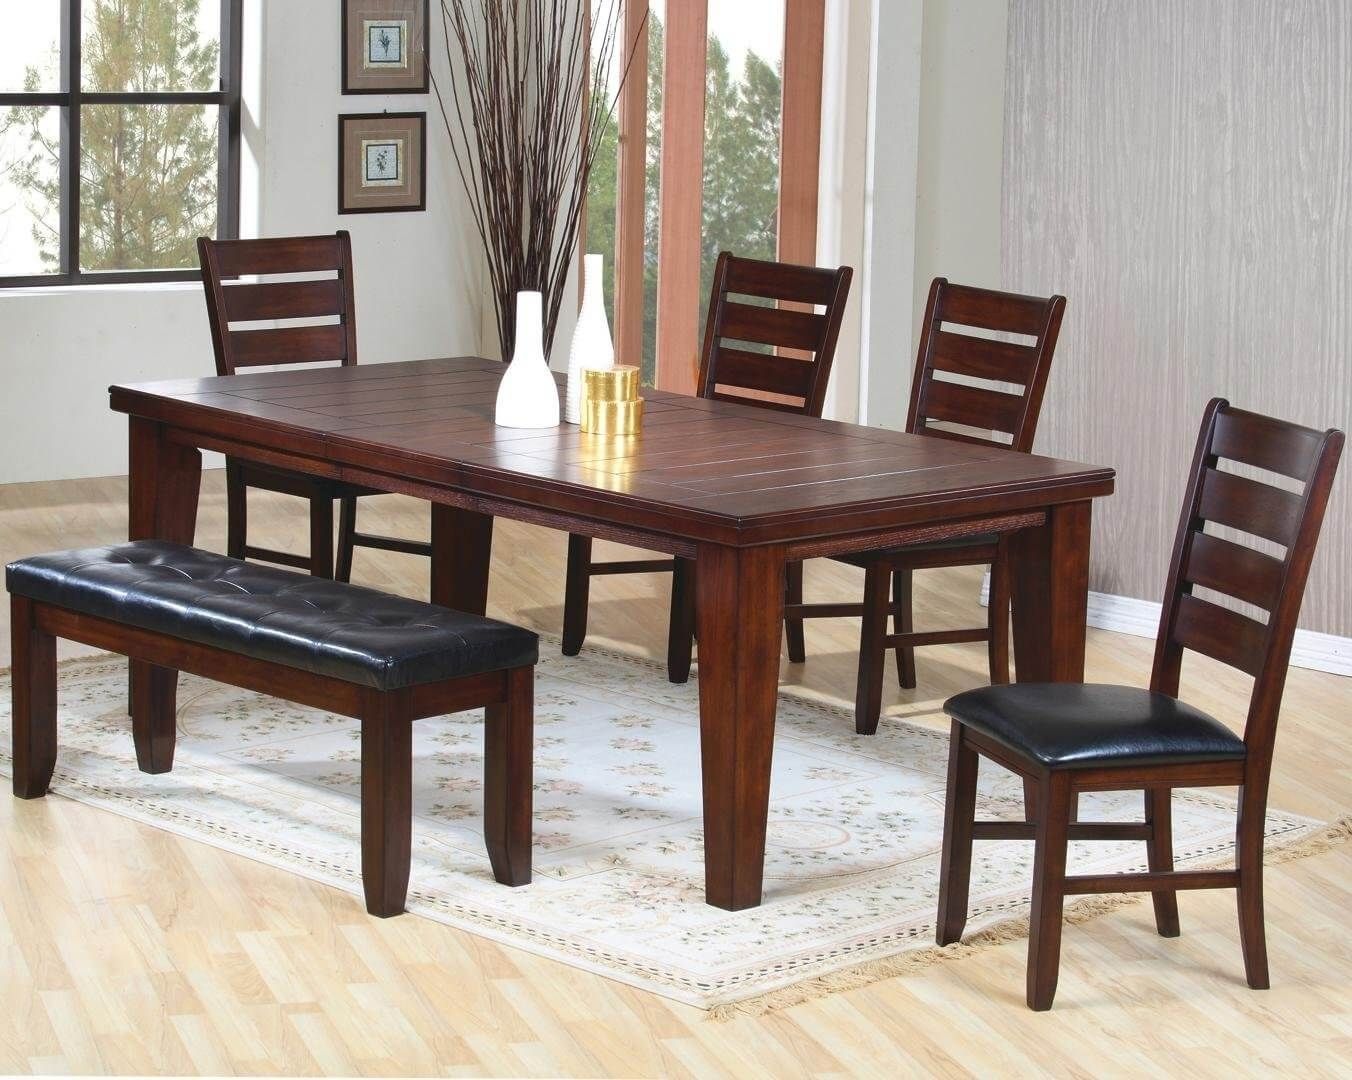 26 Dining Room Sets (Big And Small) With Bench Seating (2018) Throughout Most Recently Released Market 6 Piece Dining Sets With Side Chairs (View 2 of 20)